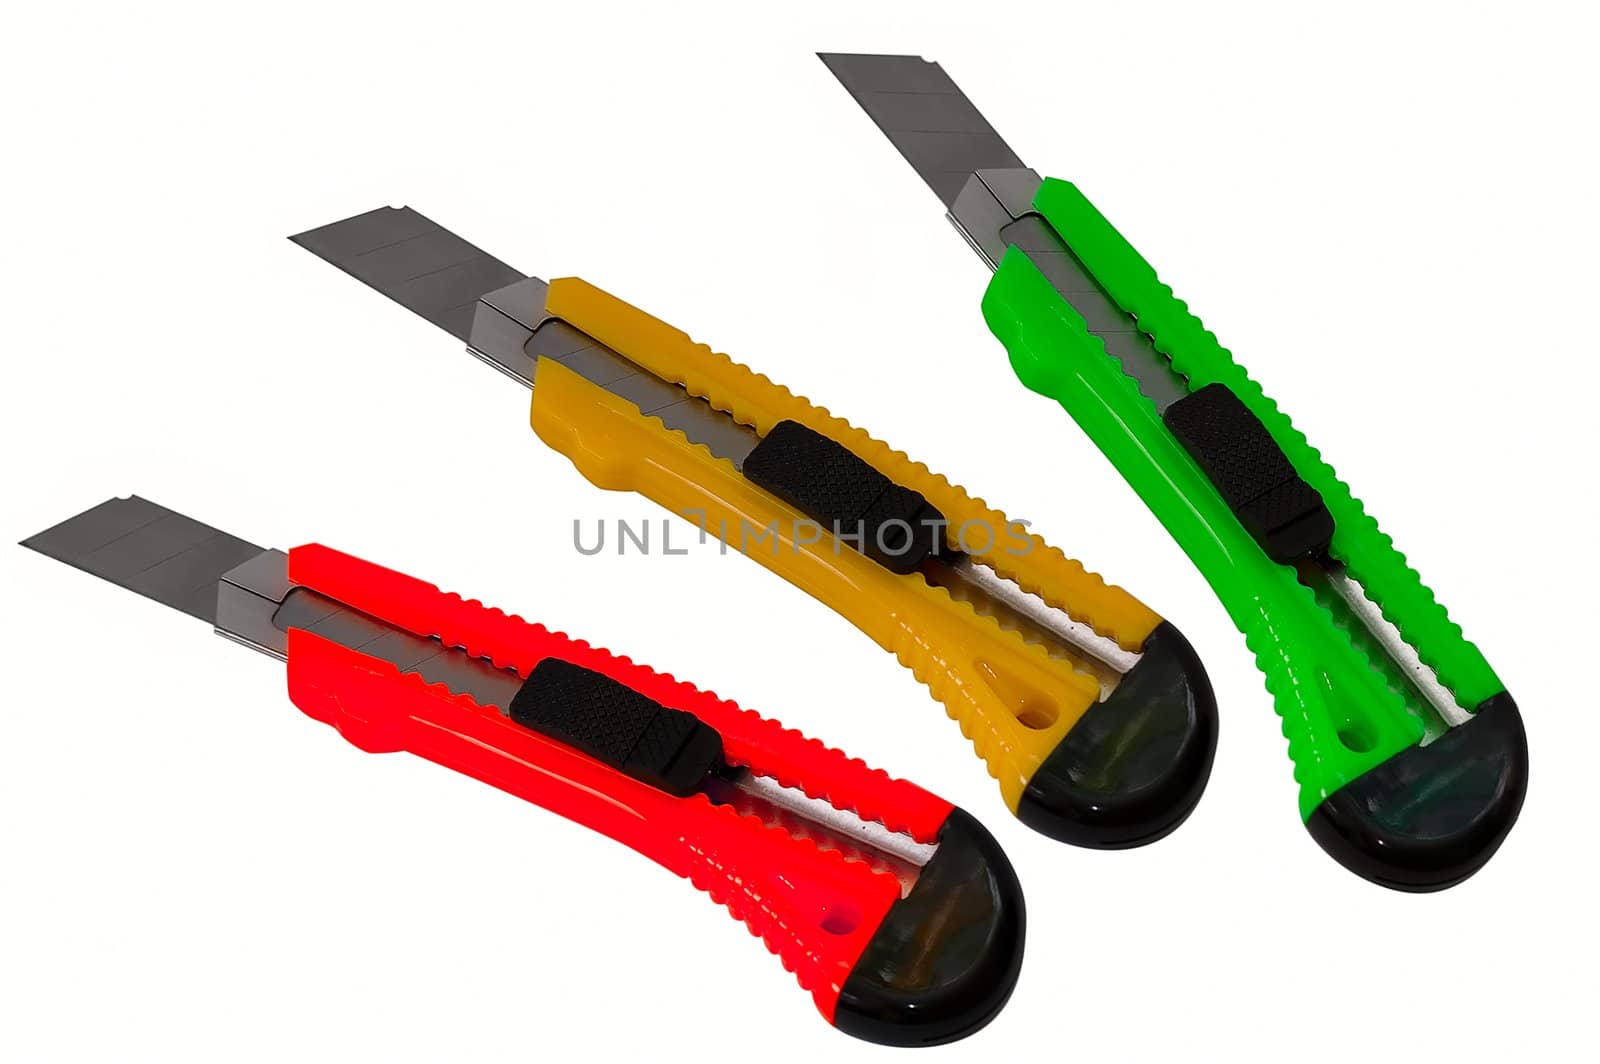 Object on white - tool - paper cut knives as traffic lights color